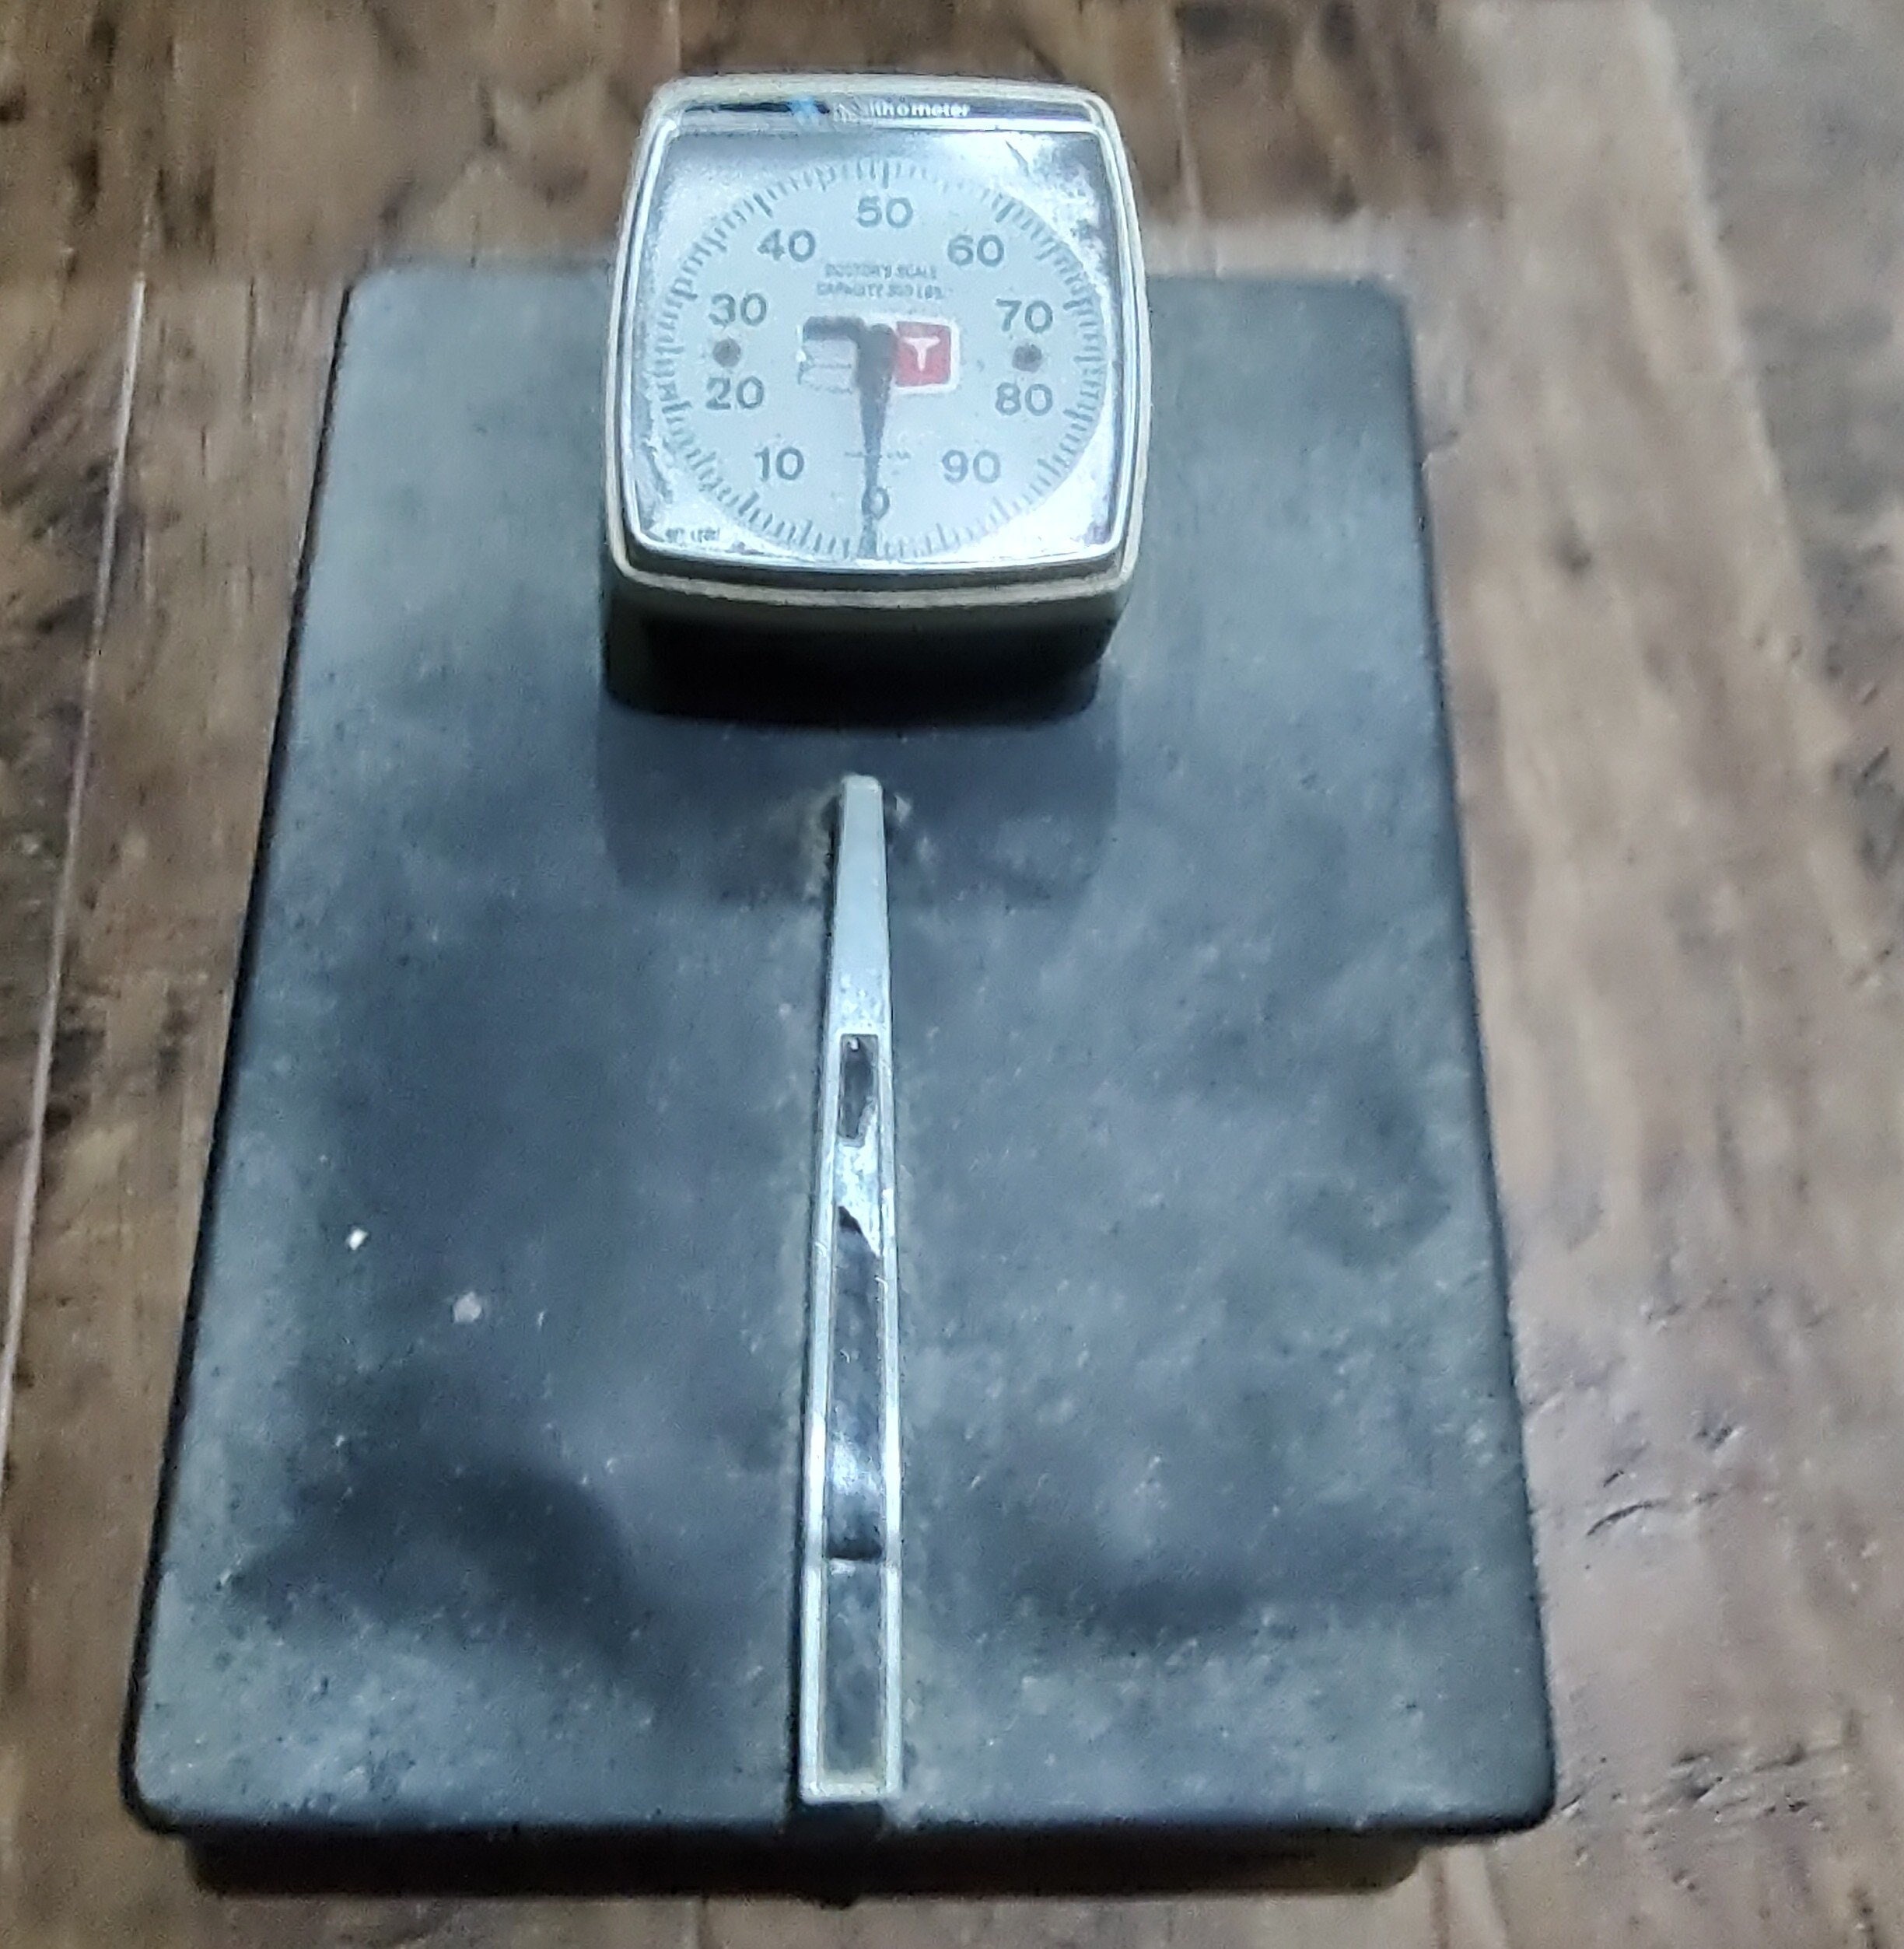 Health o meter® Professional Scales